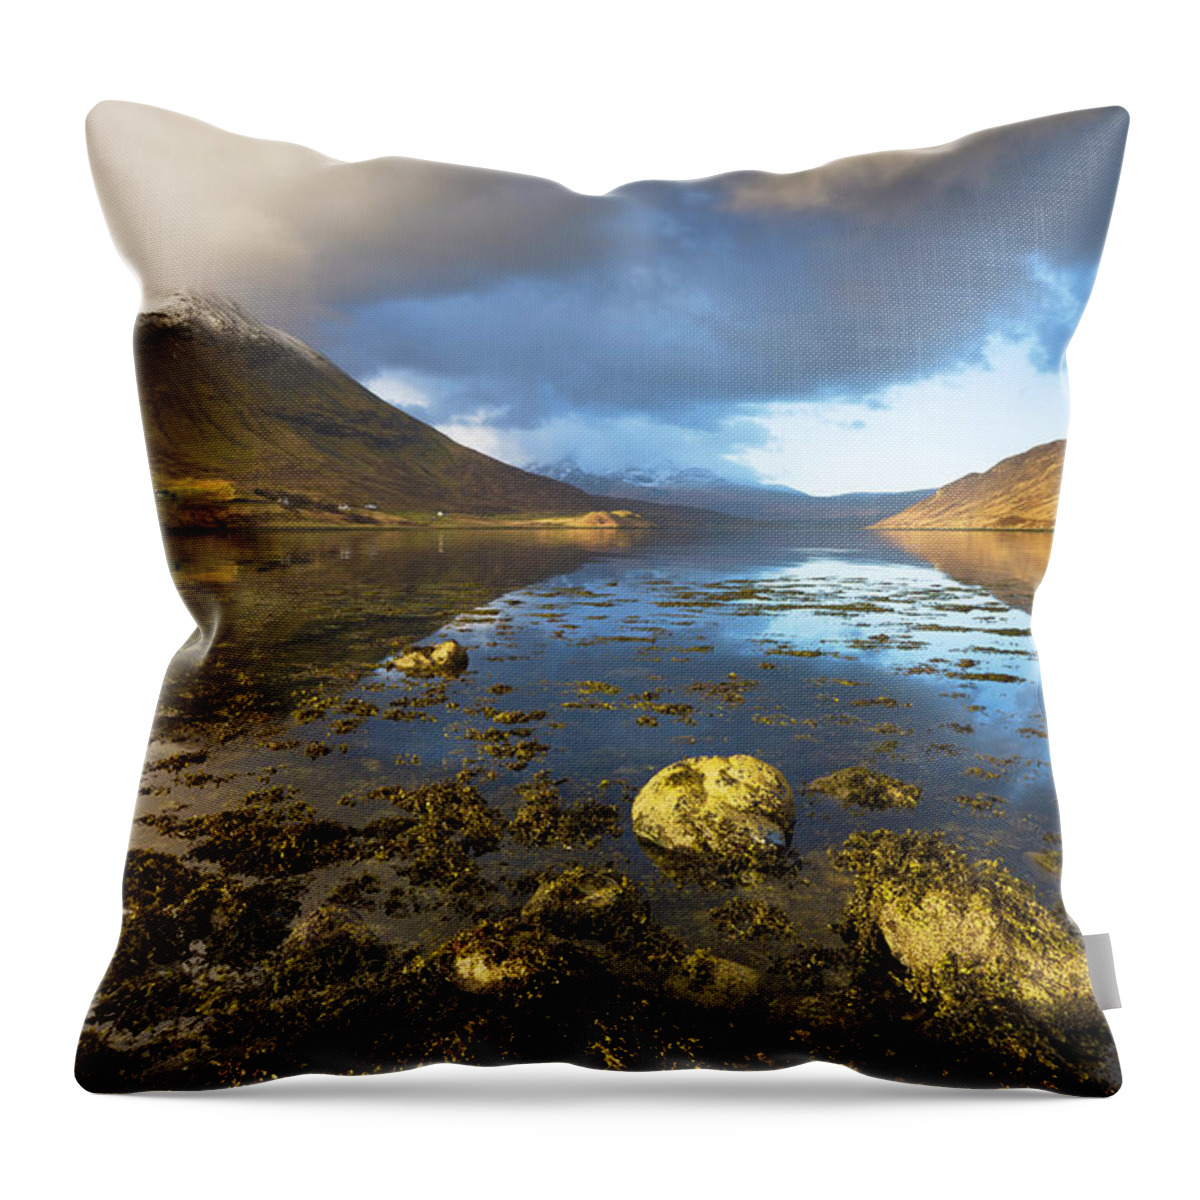 Tranquility Throw Pillow featuring the photograph Dawn Light Over Lochs And Snow Capped by Simon Butterworth